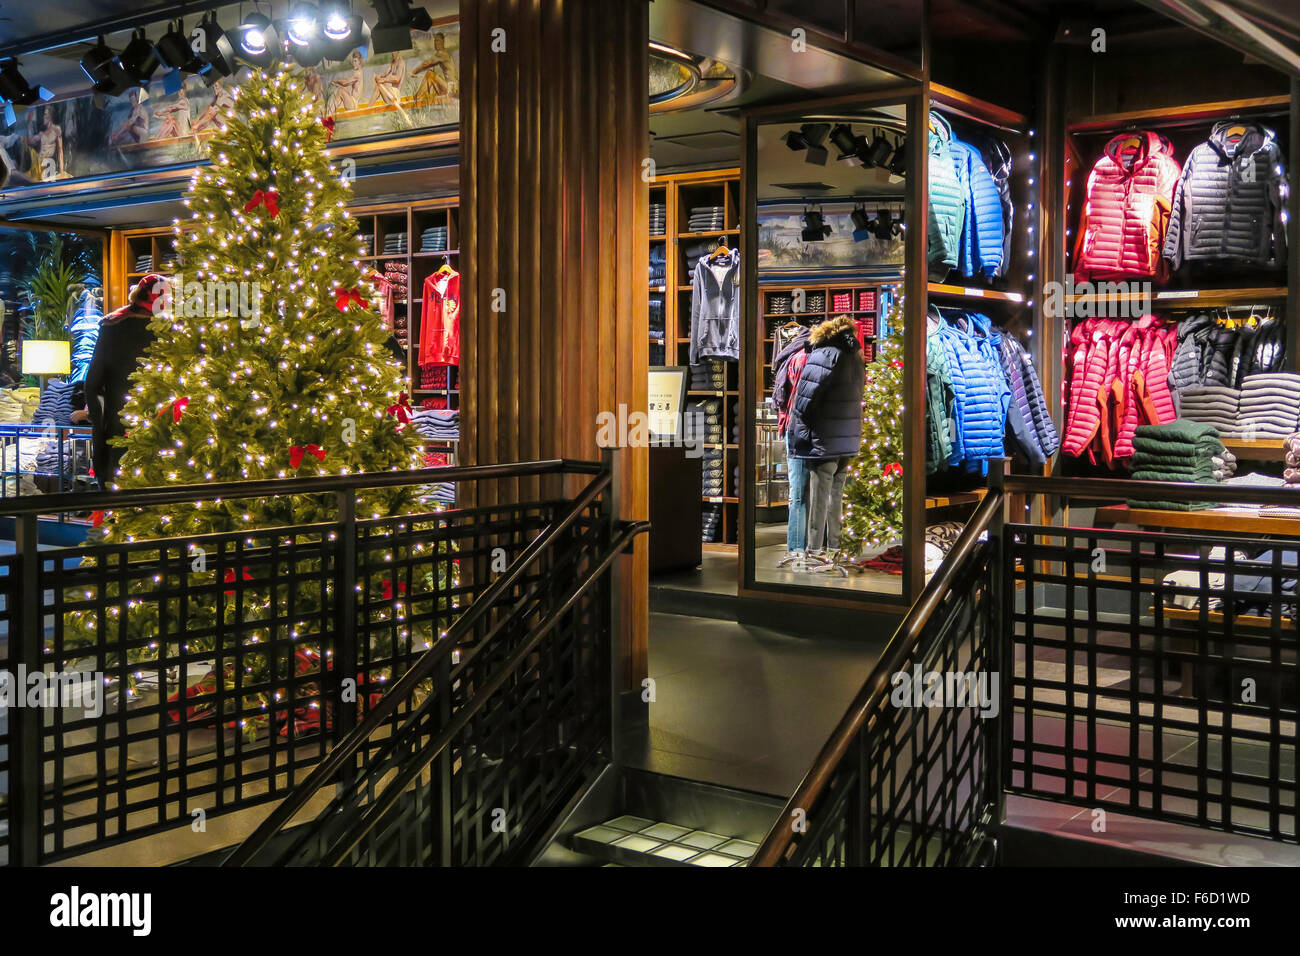 abercrombie and fitch flagship store